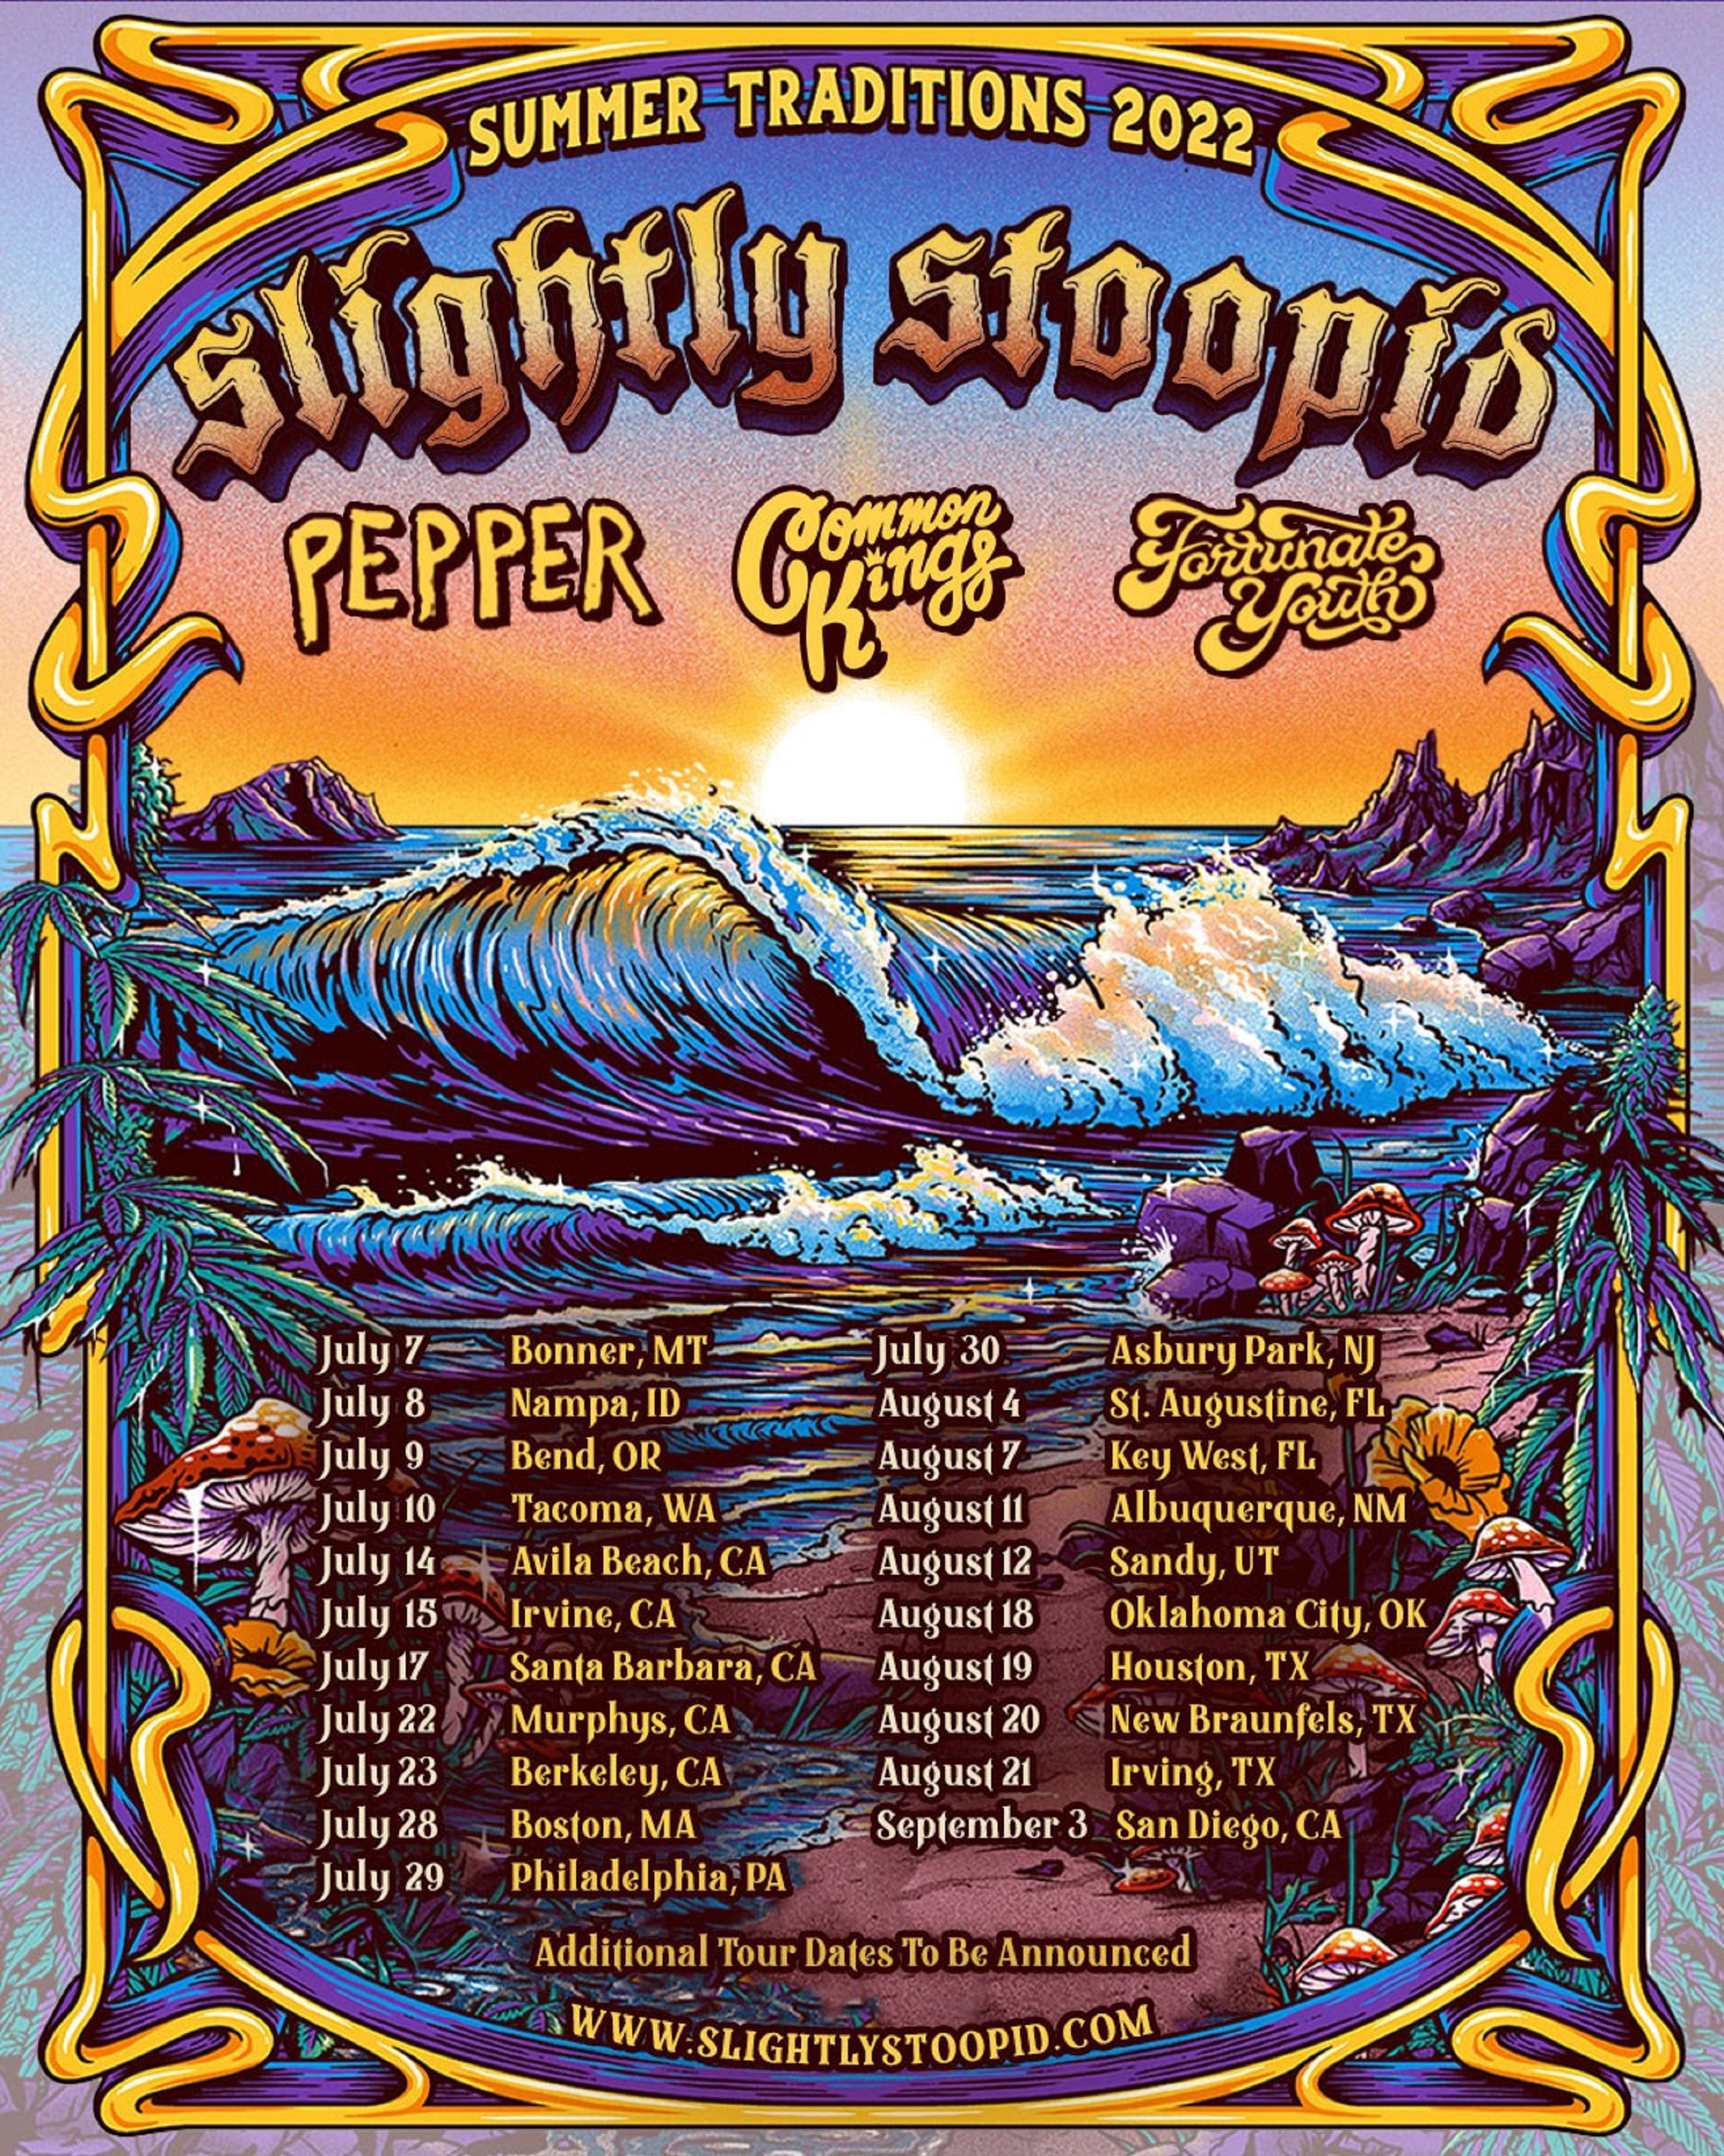 Slightly Stoopid Announce 'Summer Traditions 2022' Tour